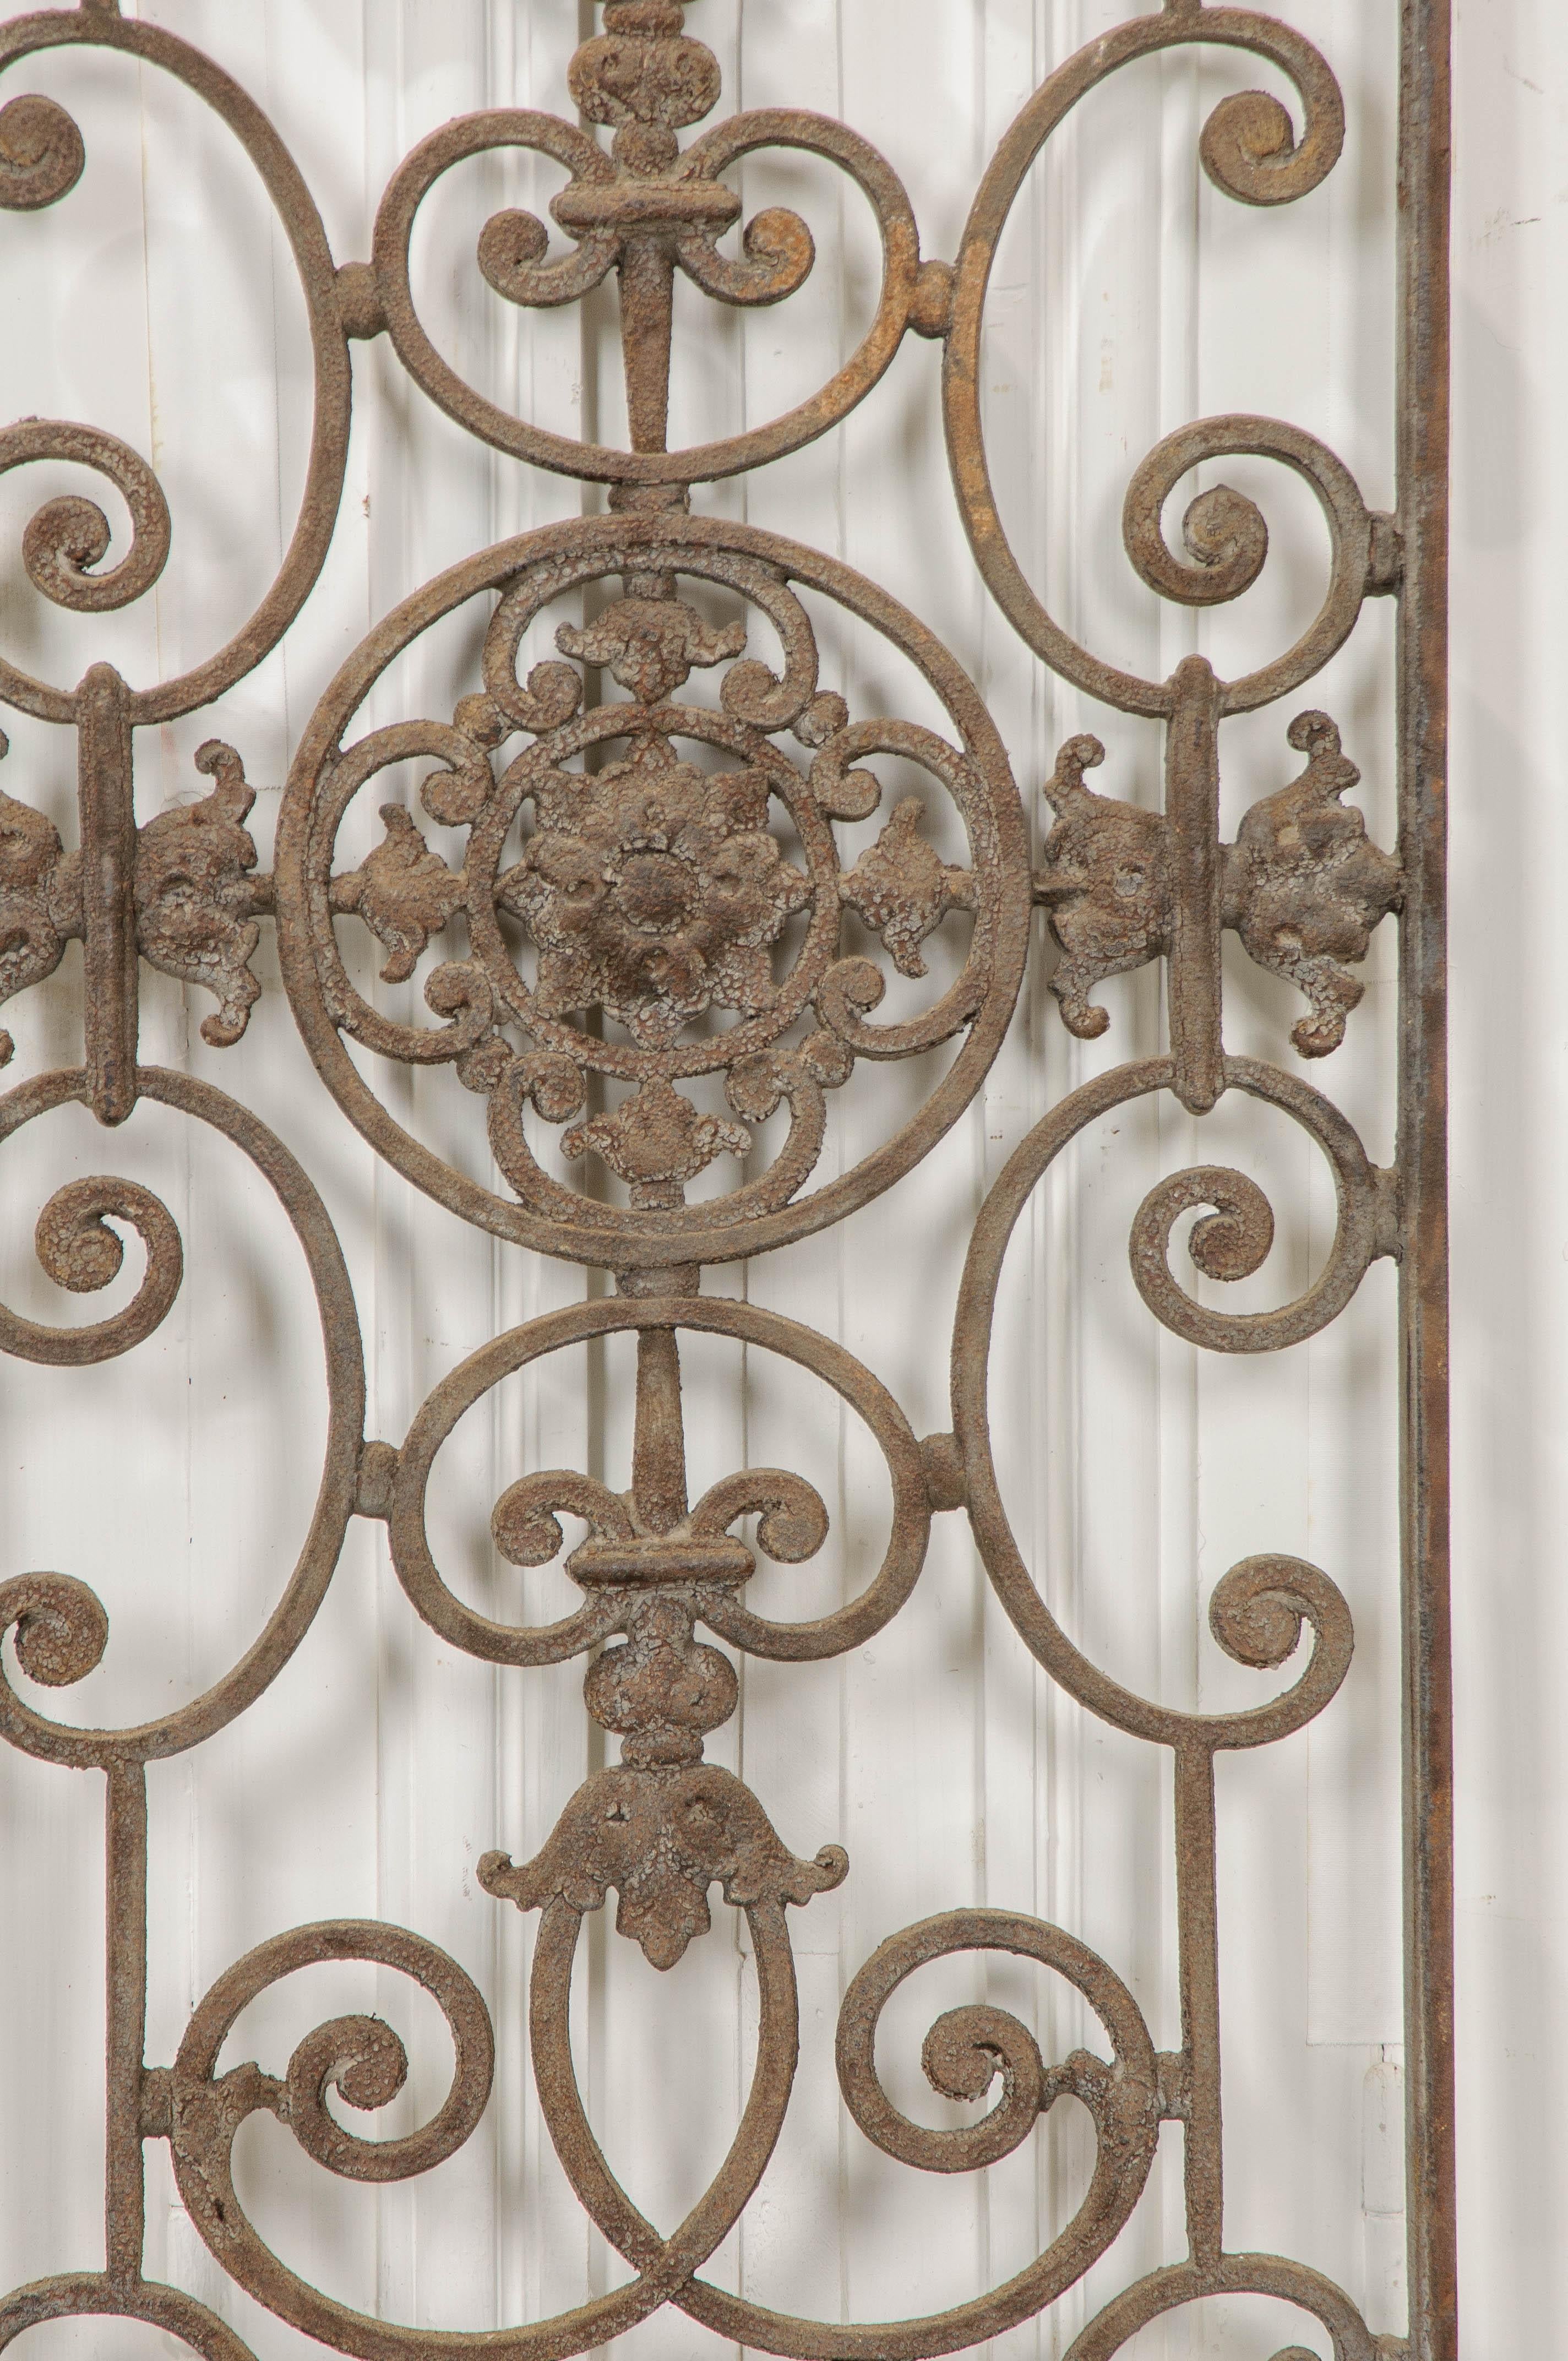 A central cruciform design of flowers and filigree is found on this wonderful wrought iron grille, made in France at the beginning of the 20th century. This decorative accent piece has acquired a wonderful patina that will bring an element of